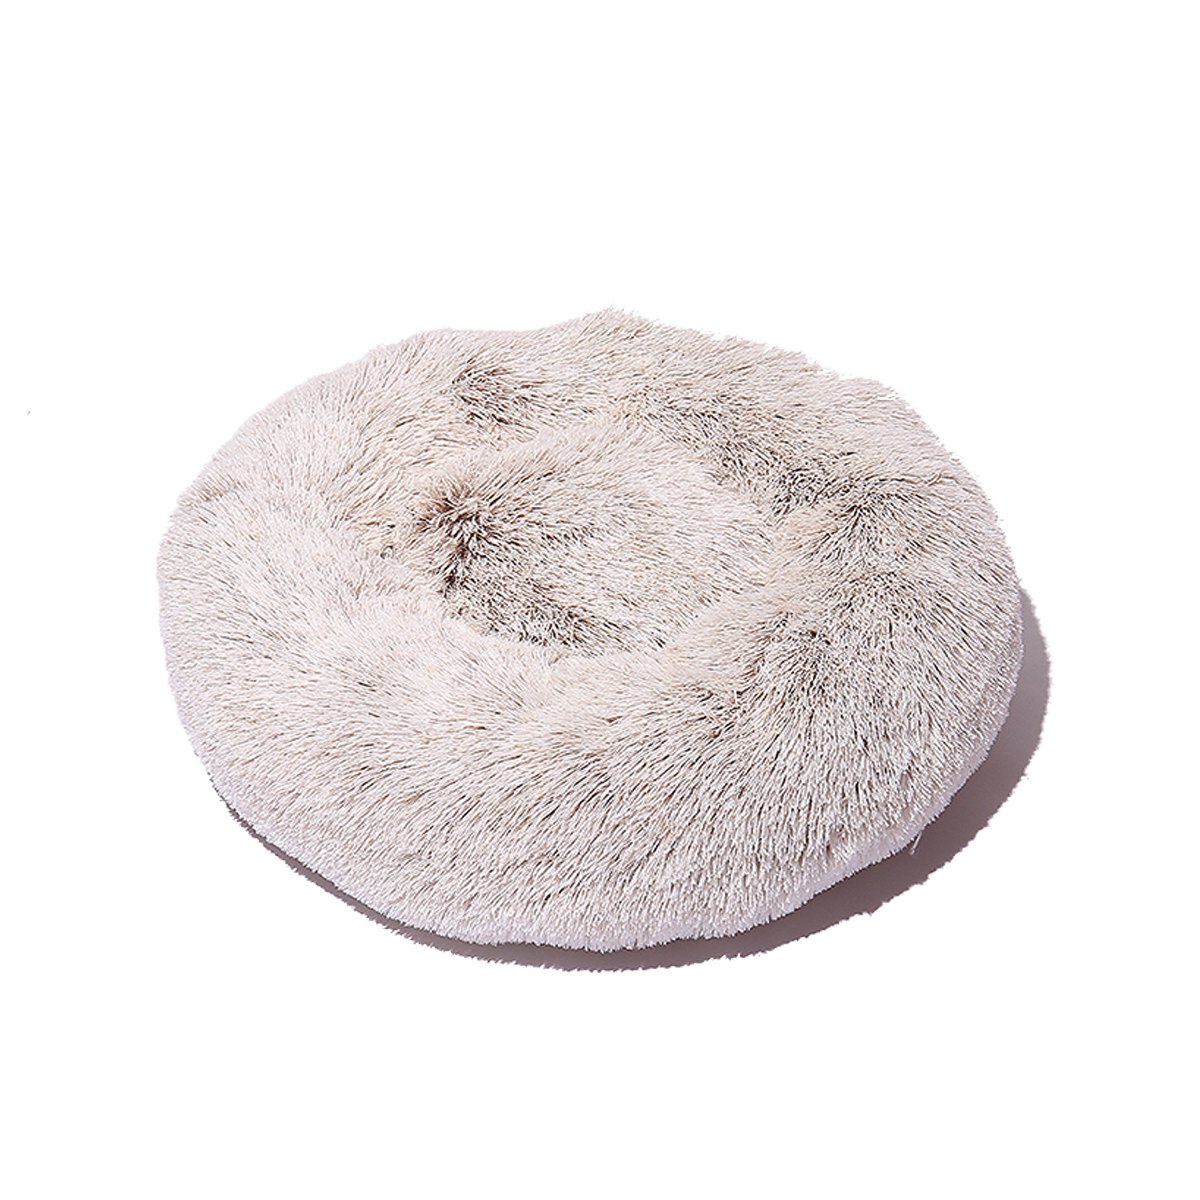 70cm-Plush-Fluffy-Soft-Pet-Bed-for-Cats--Dogs-Calming-Bed-Pad-Soft-Mat-Home-1808936-11